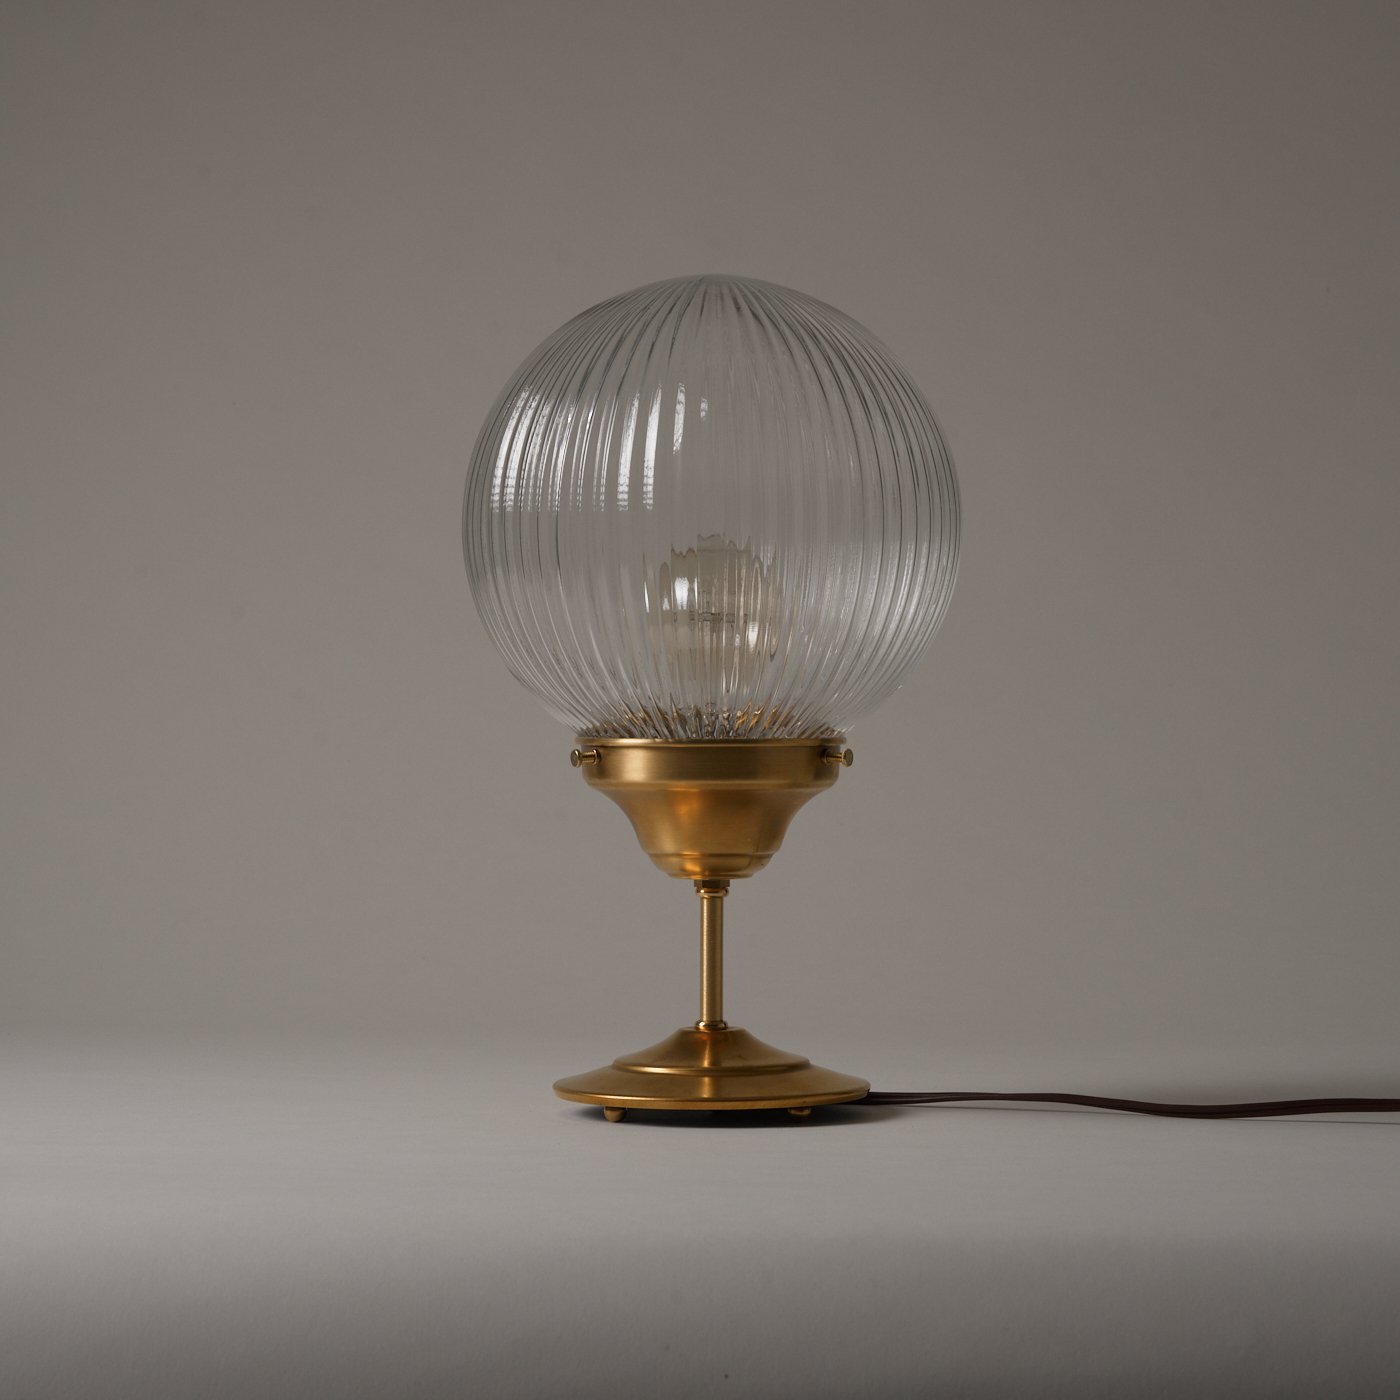 OSL090B-LC GLASS SHADE STAND LIGHT - POINT NO.39｜東京｜目黒｜真鍮照明｜ヴィンテージ家具